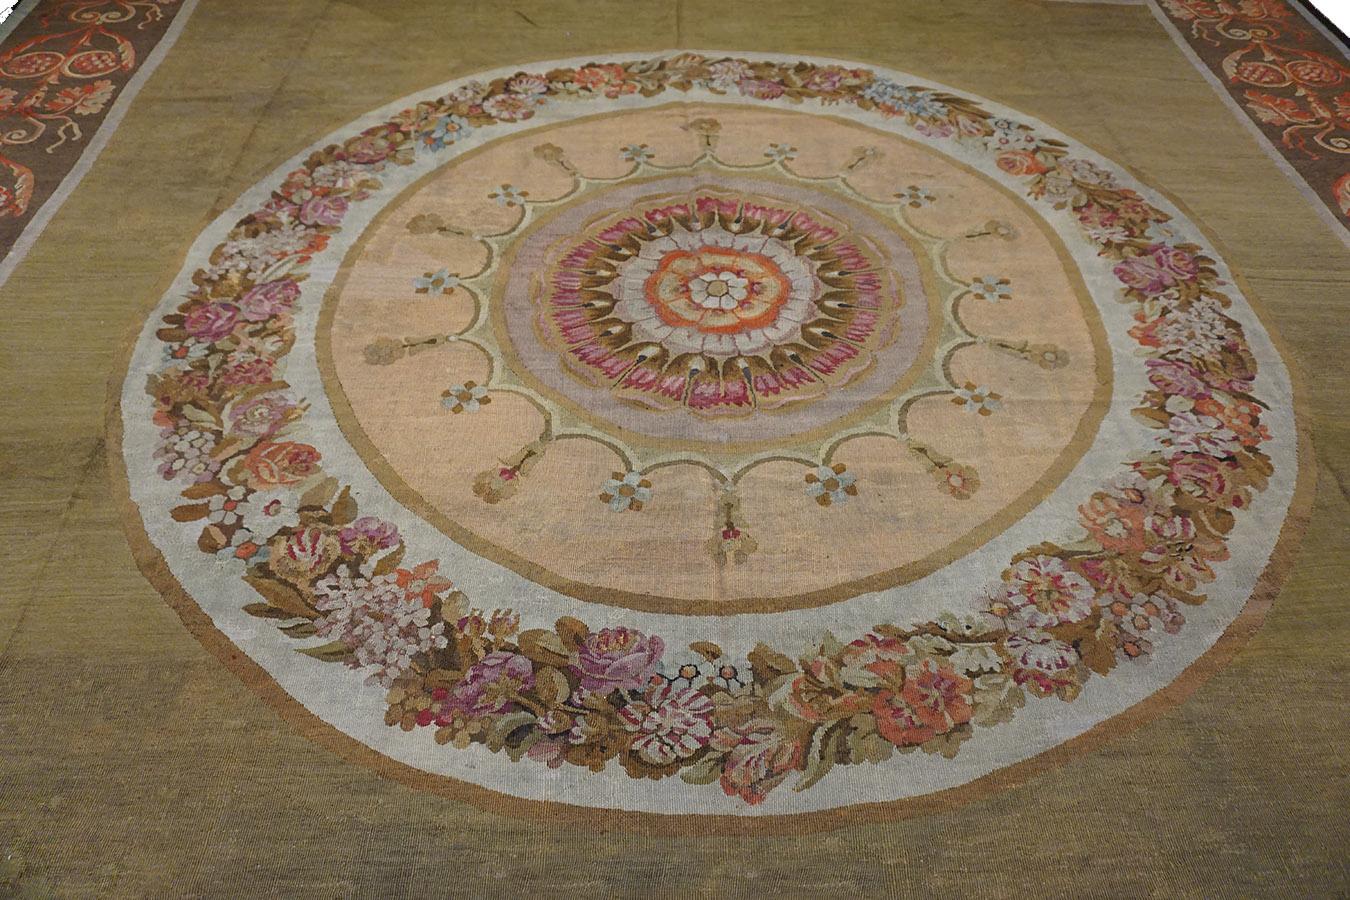 Wool Early 19th Century French Empire Period Aubusson Carpet (13'8